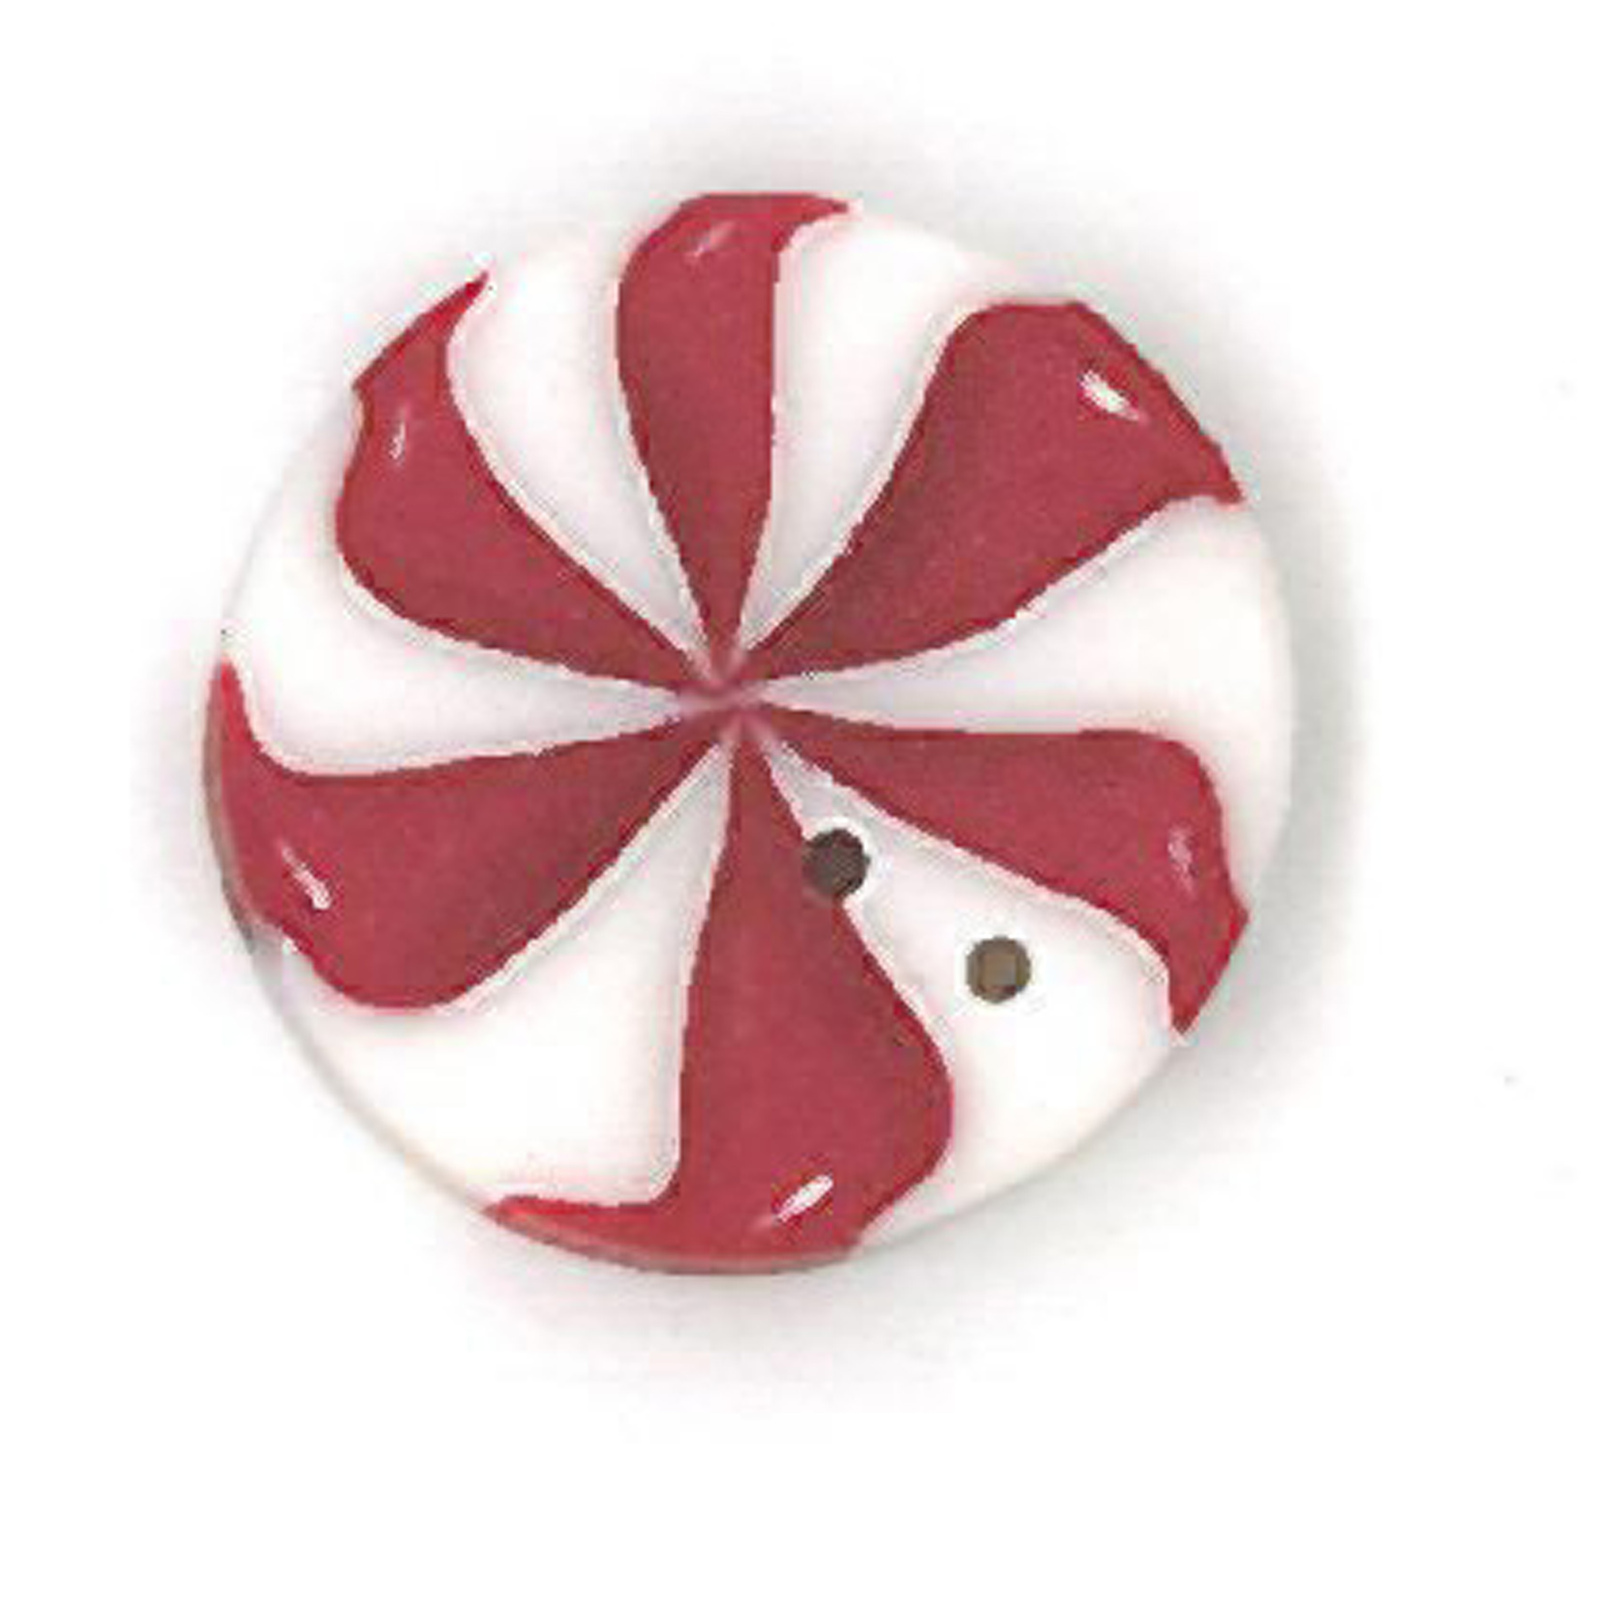 Med Peppermint Swirl nh1067m handmade clay button JABC Just Another Button Compa - $1.80